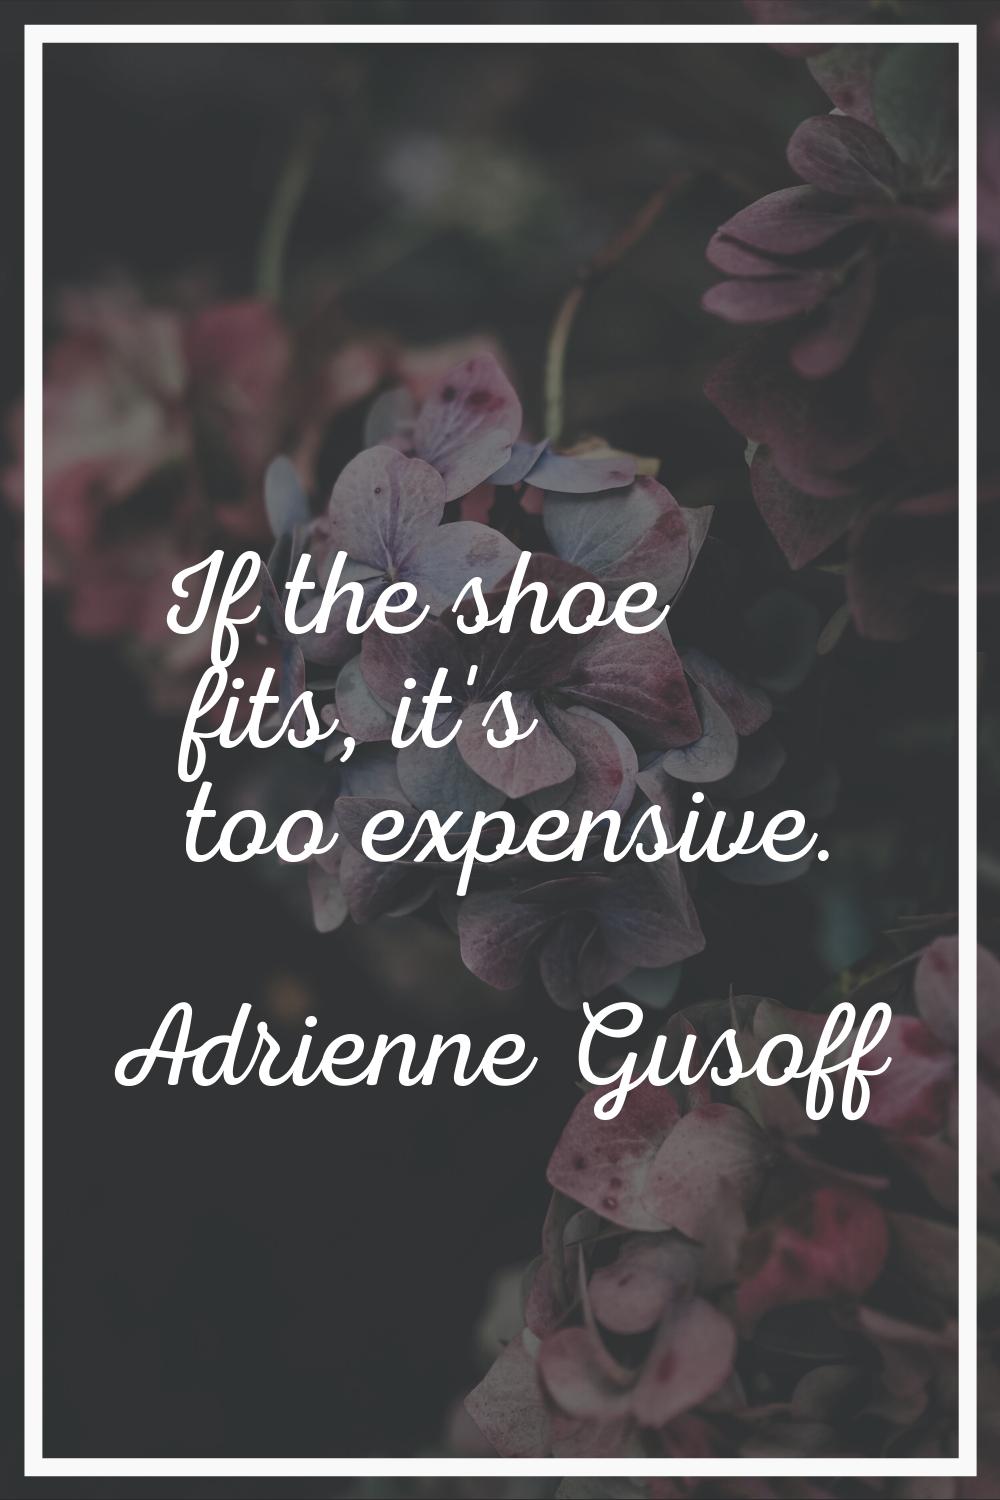 If the shoe fits, it's too expensive.